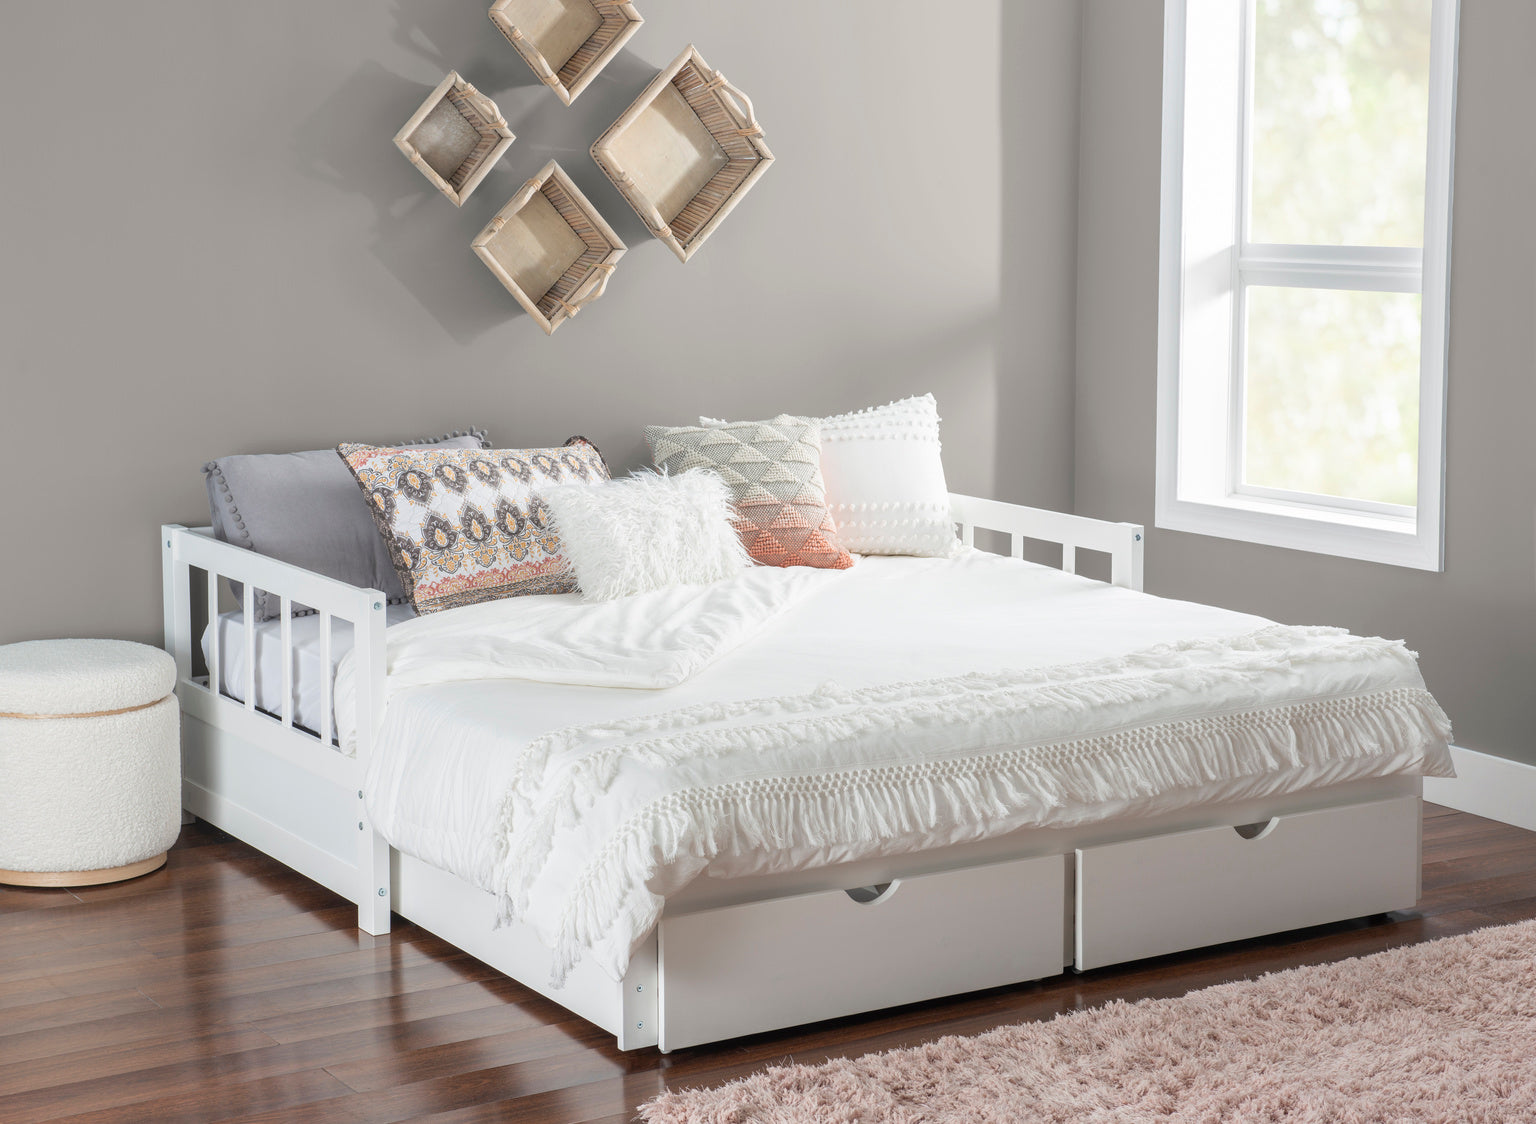 WEEKLY or MONTHLY. White Hope Eternal Twin Daybed – Community Furnishings